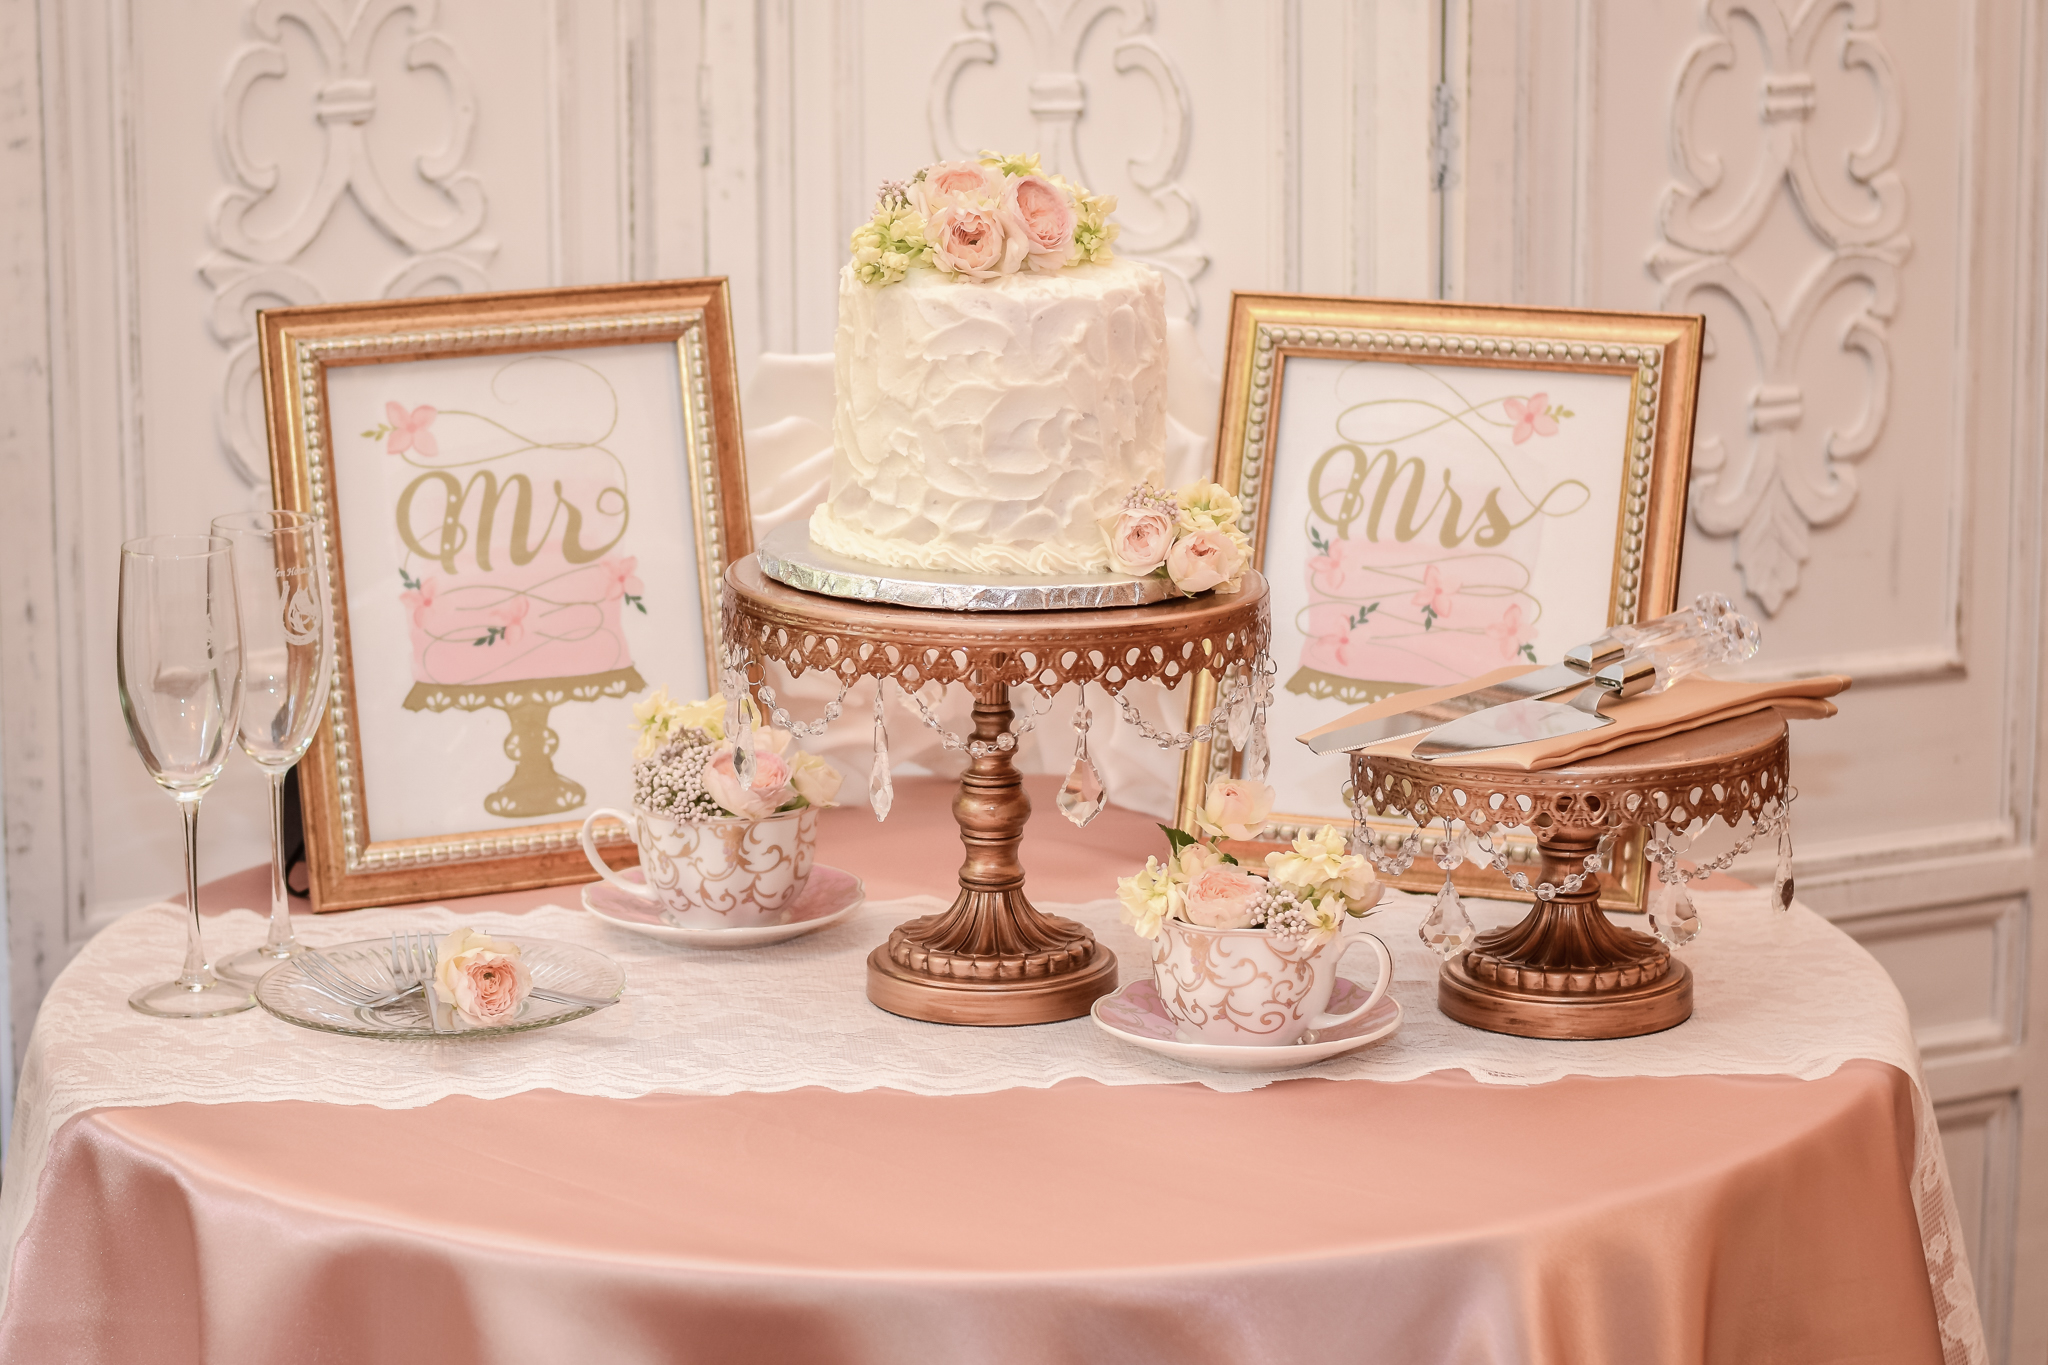 tiny elegant wedding cake on a sweethearts table for two!